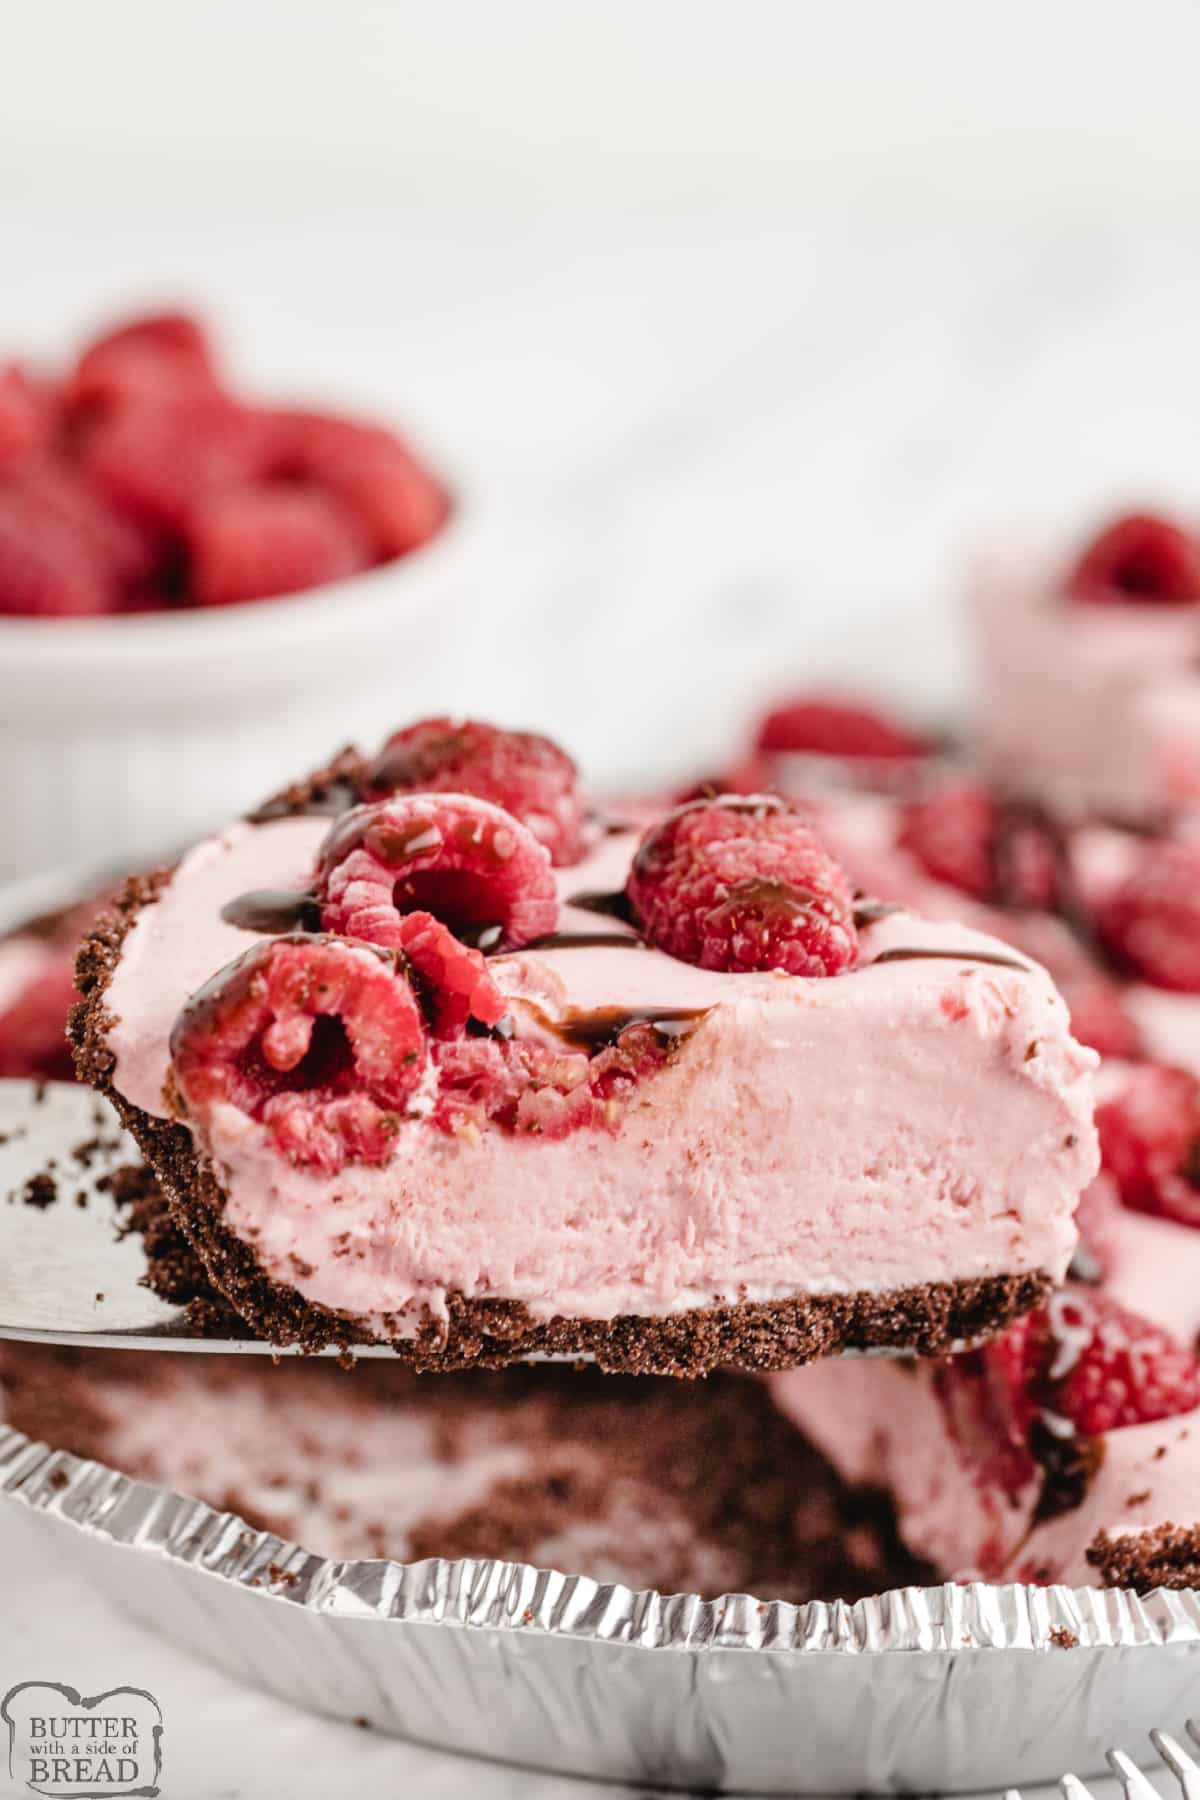 Frozen Raspberry Pie is a refreshing dessert that's perfect for summer. Made with fresh raspberries, an Oreo crust and real whipped cream, this frozen dessert is absolutely delicious!